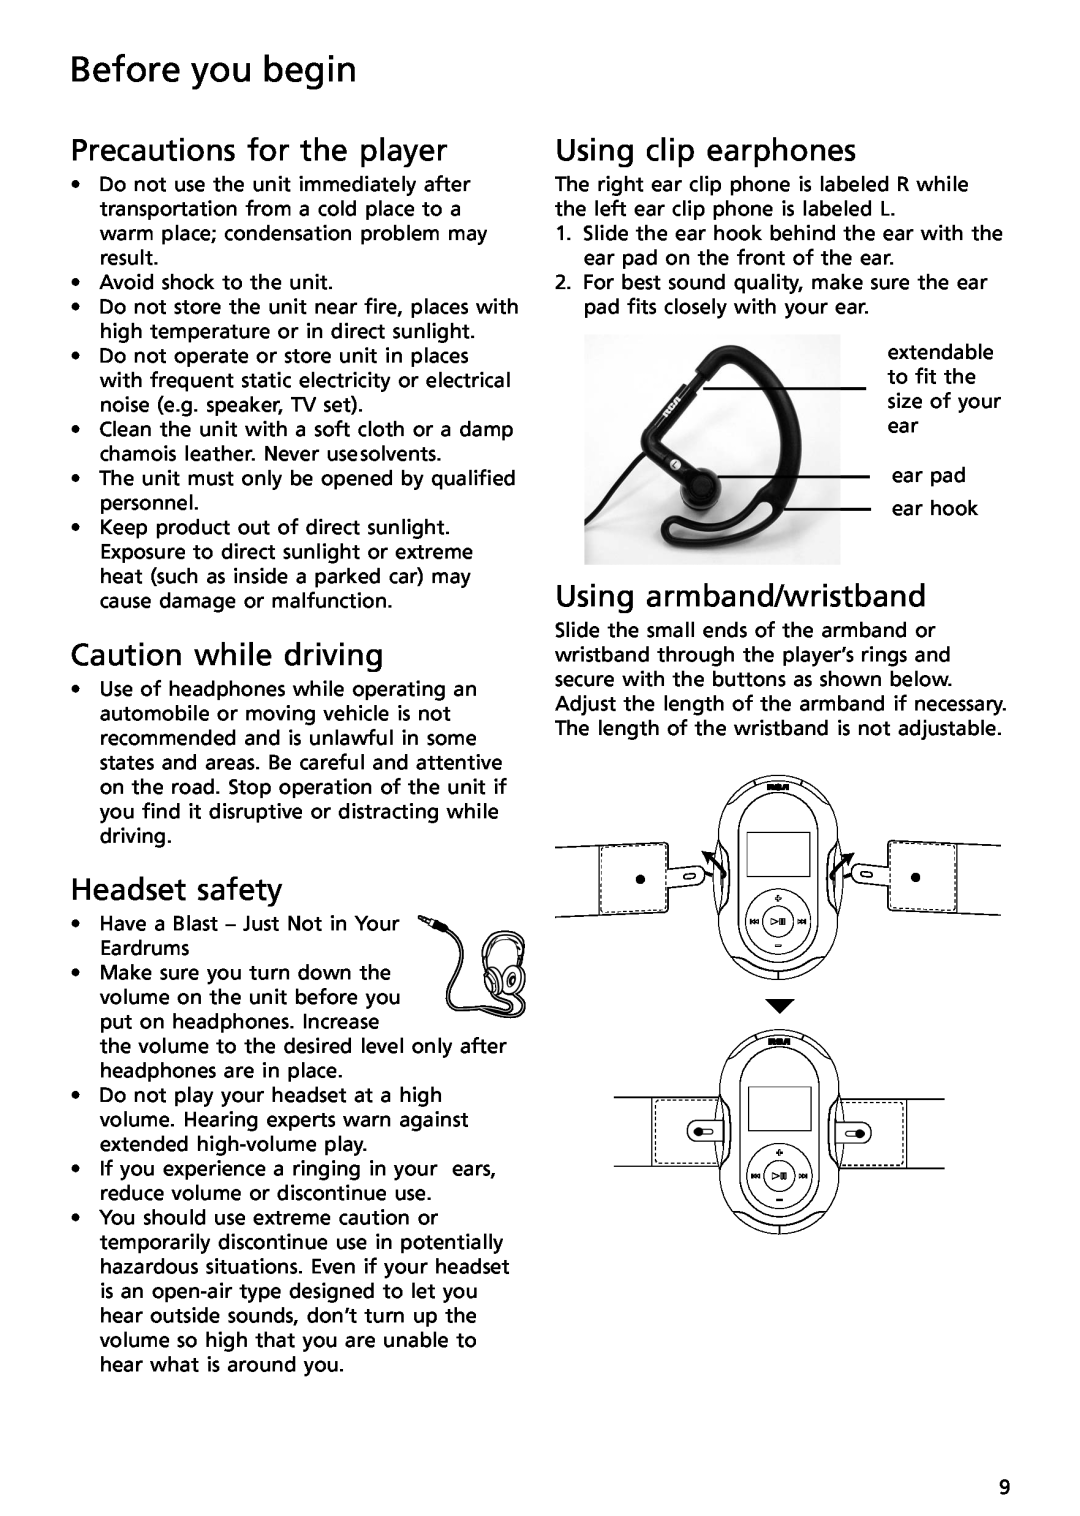 RCA SC2001 Precautions for the player, Caution while driving, Headset safety, Using clip earphones, Before you begin 